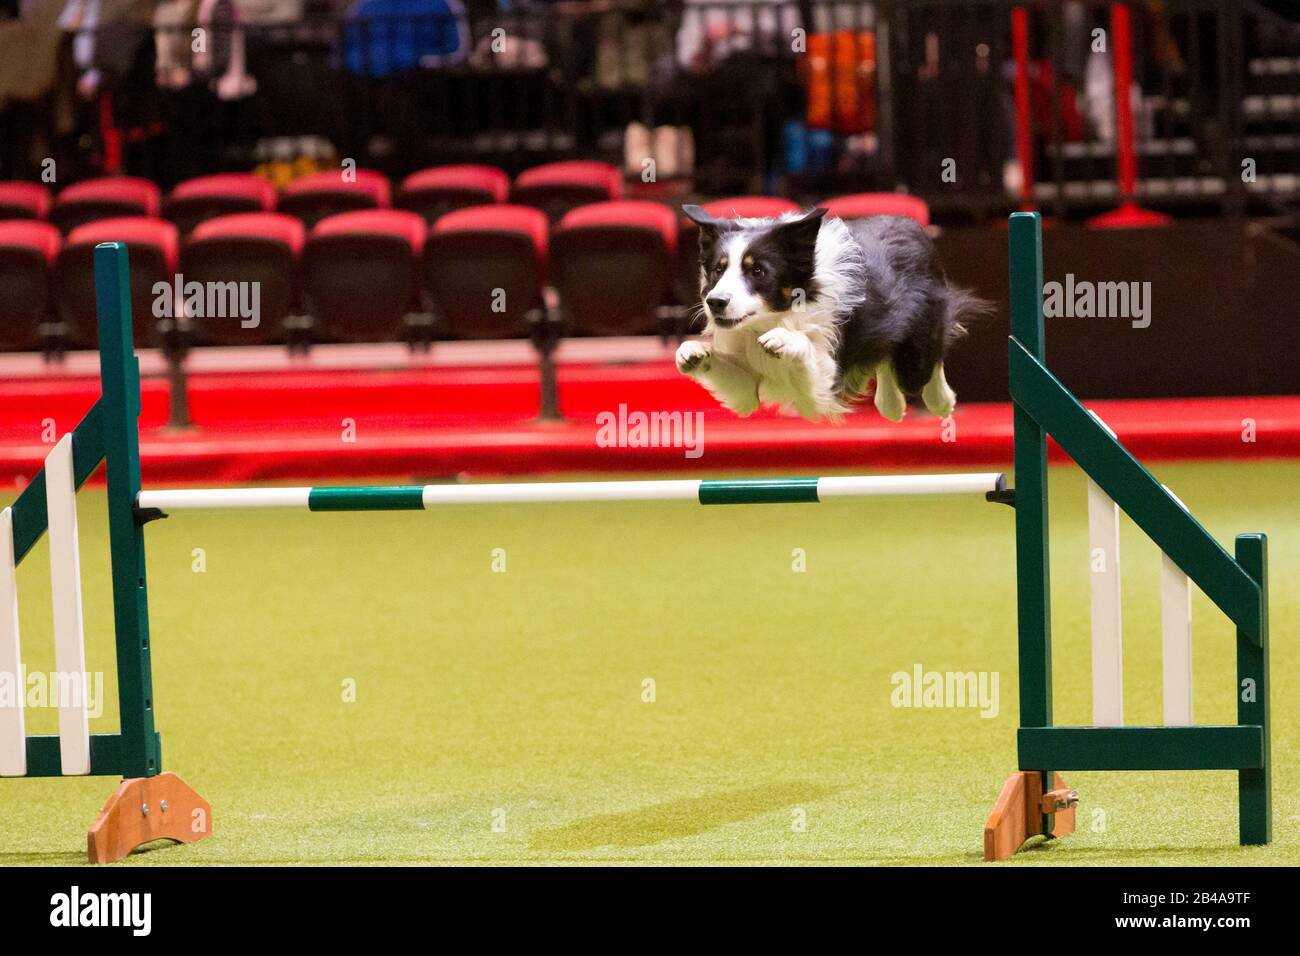 Birmingham, UK. 6th Mar, 2020. Rescue dogs take part in an agility display on the second day of Crufts. Credit: Jon Freeman/Alamy Live News Credit: Jon Freeman/Alamy Live News Stock Photo